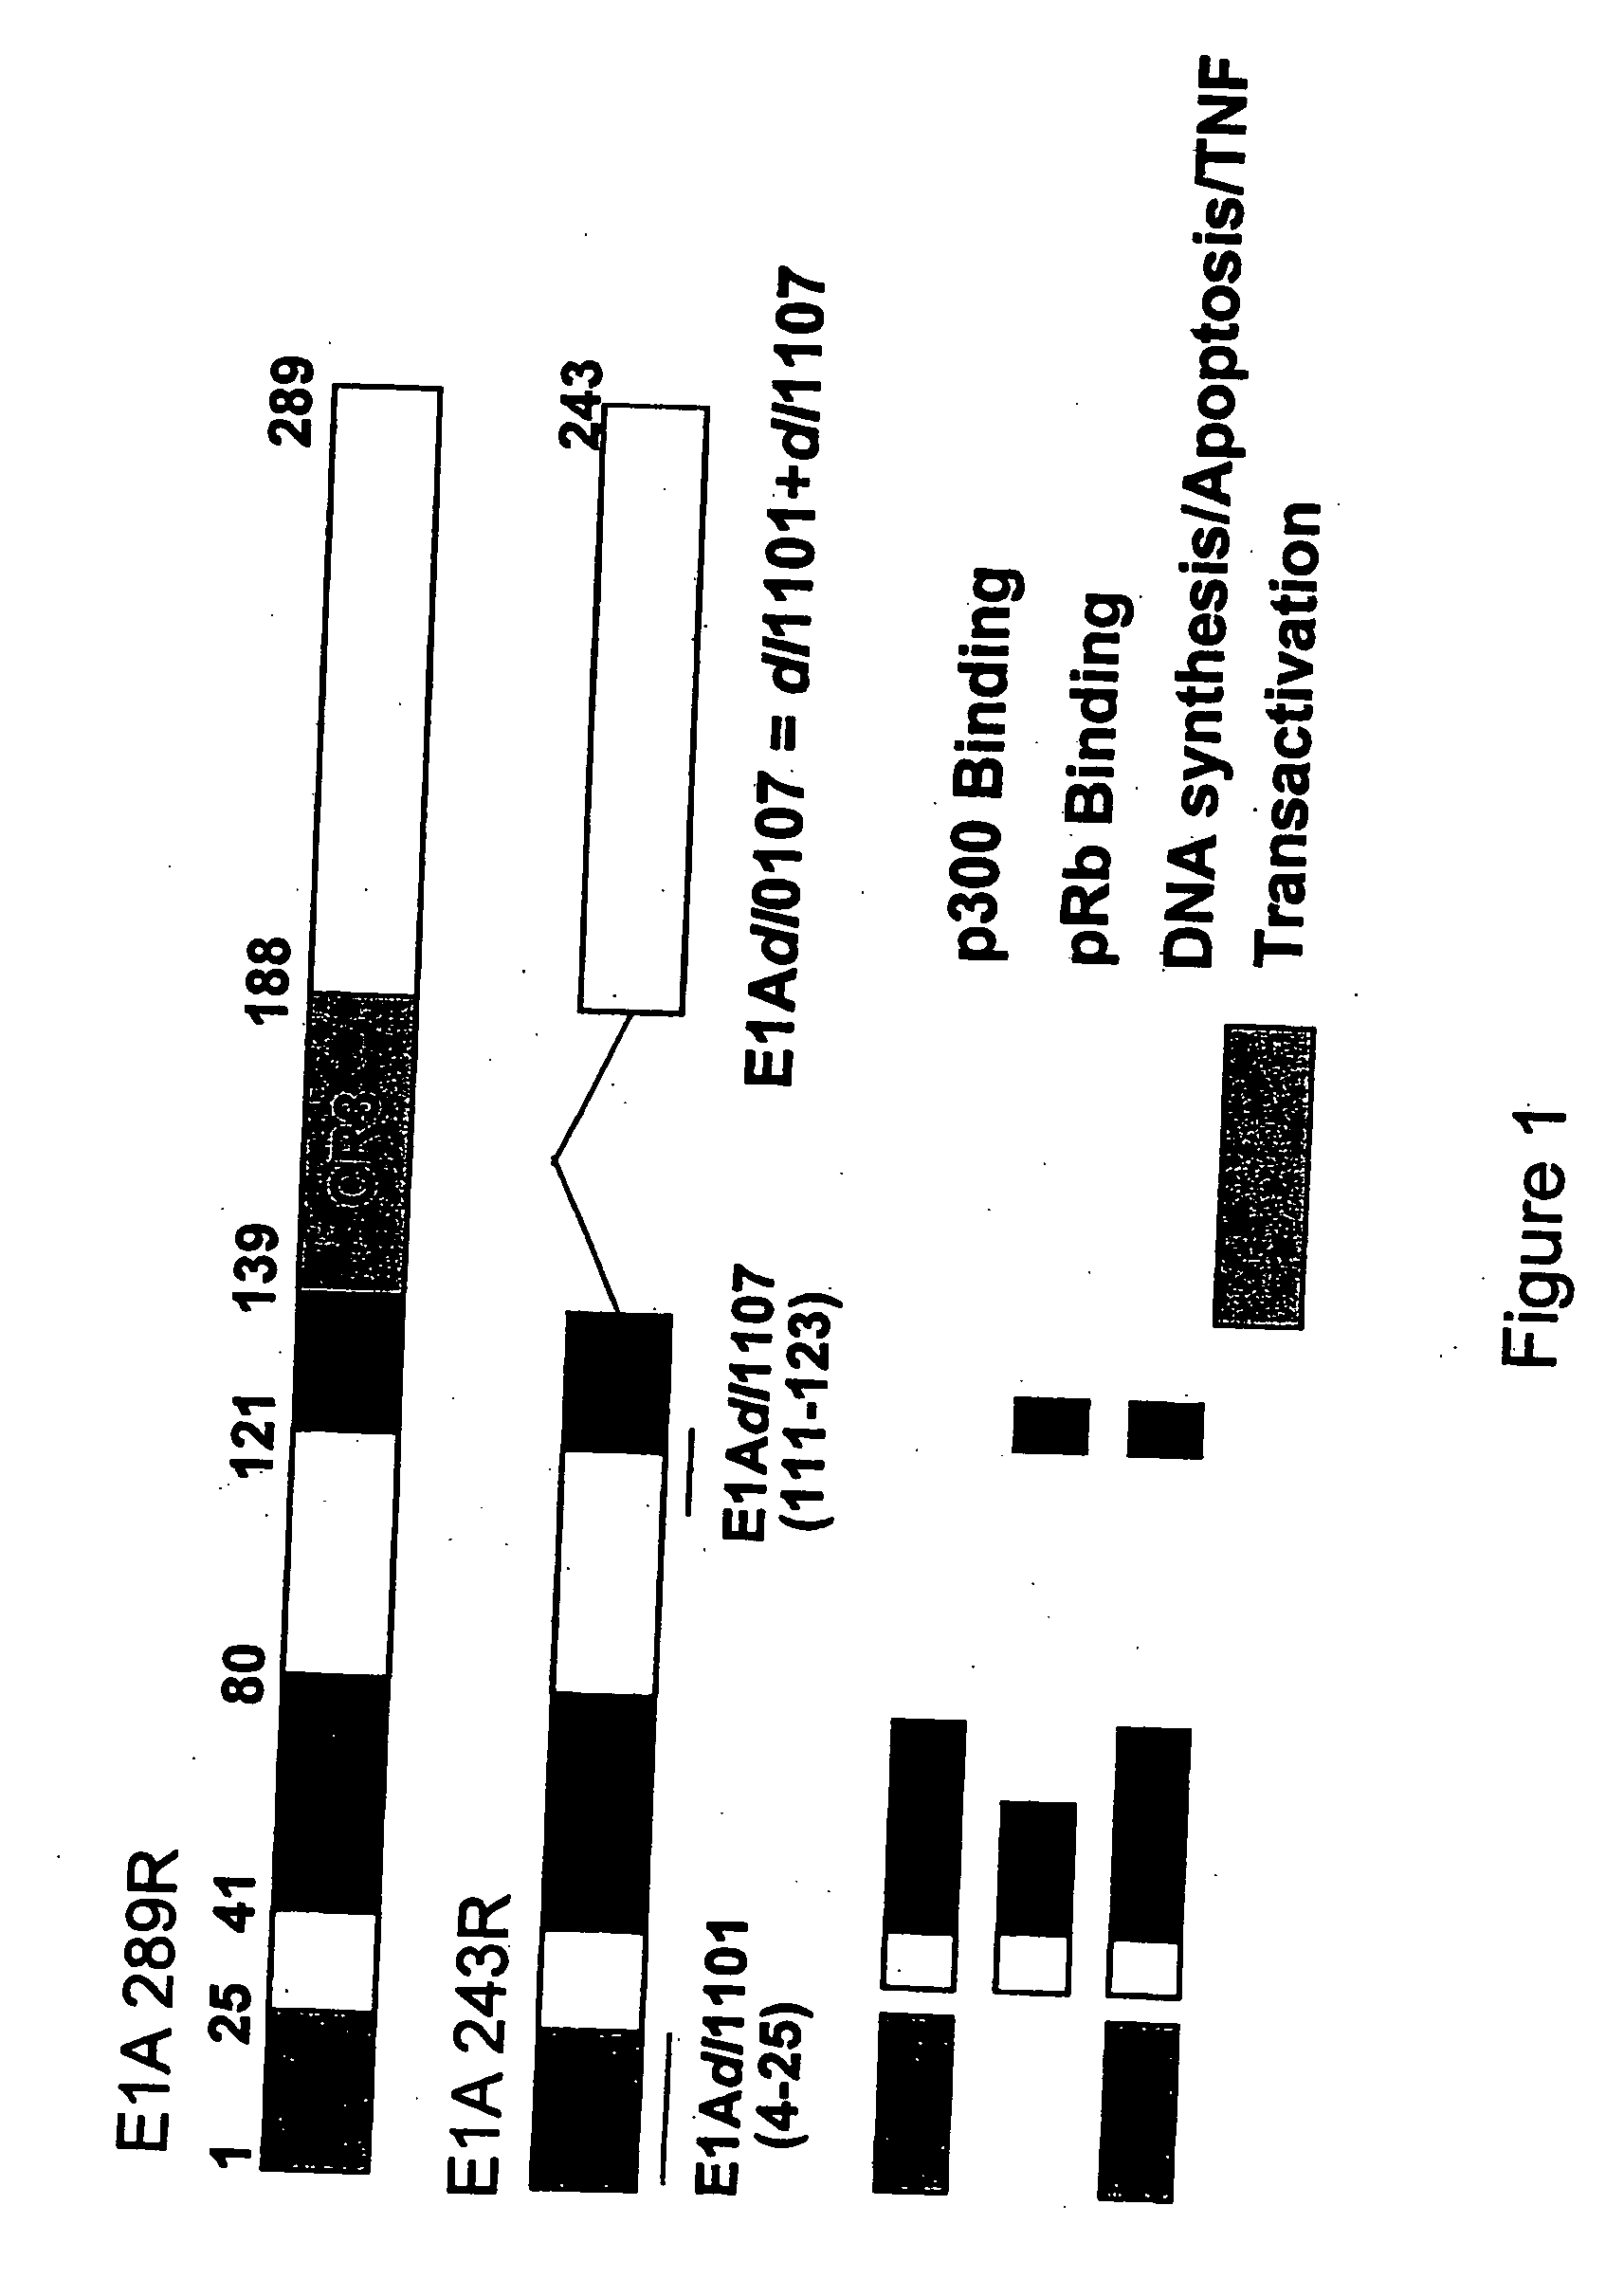 Cell lines for production of replication-defective adenovirus